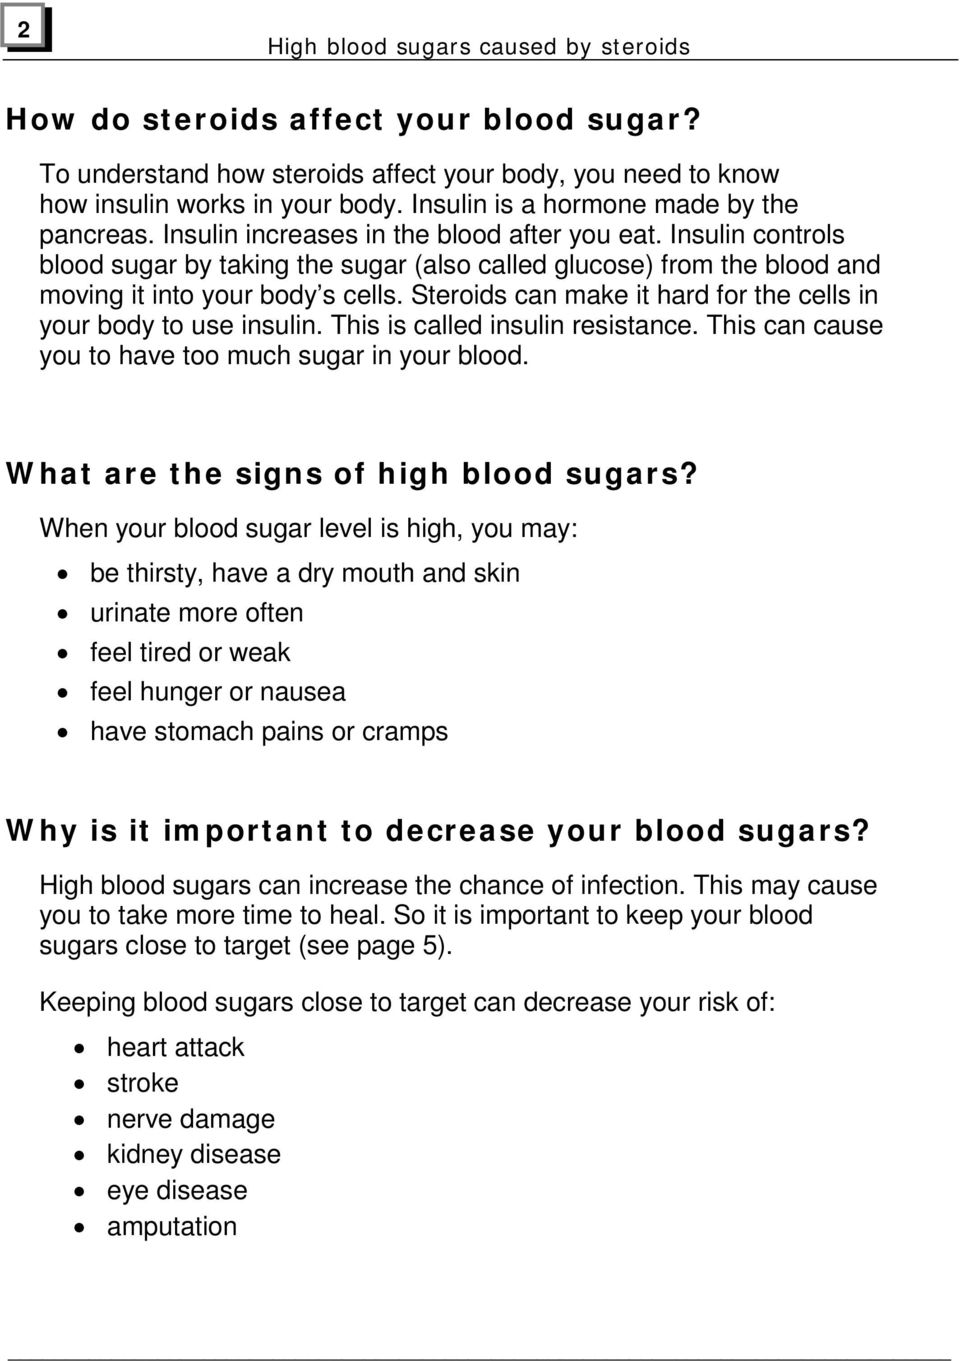 Insulin controls blood sugar by taking the sugar (also called glucose) from the blood and moving it into your body s cells. Steroids can make it hard for the cells in your body to use insulin.